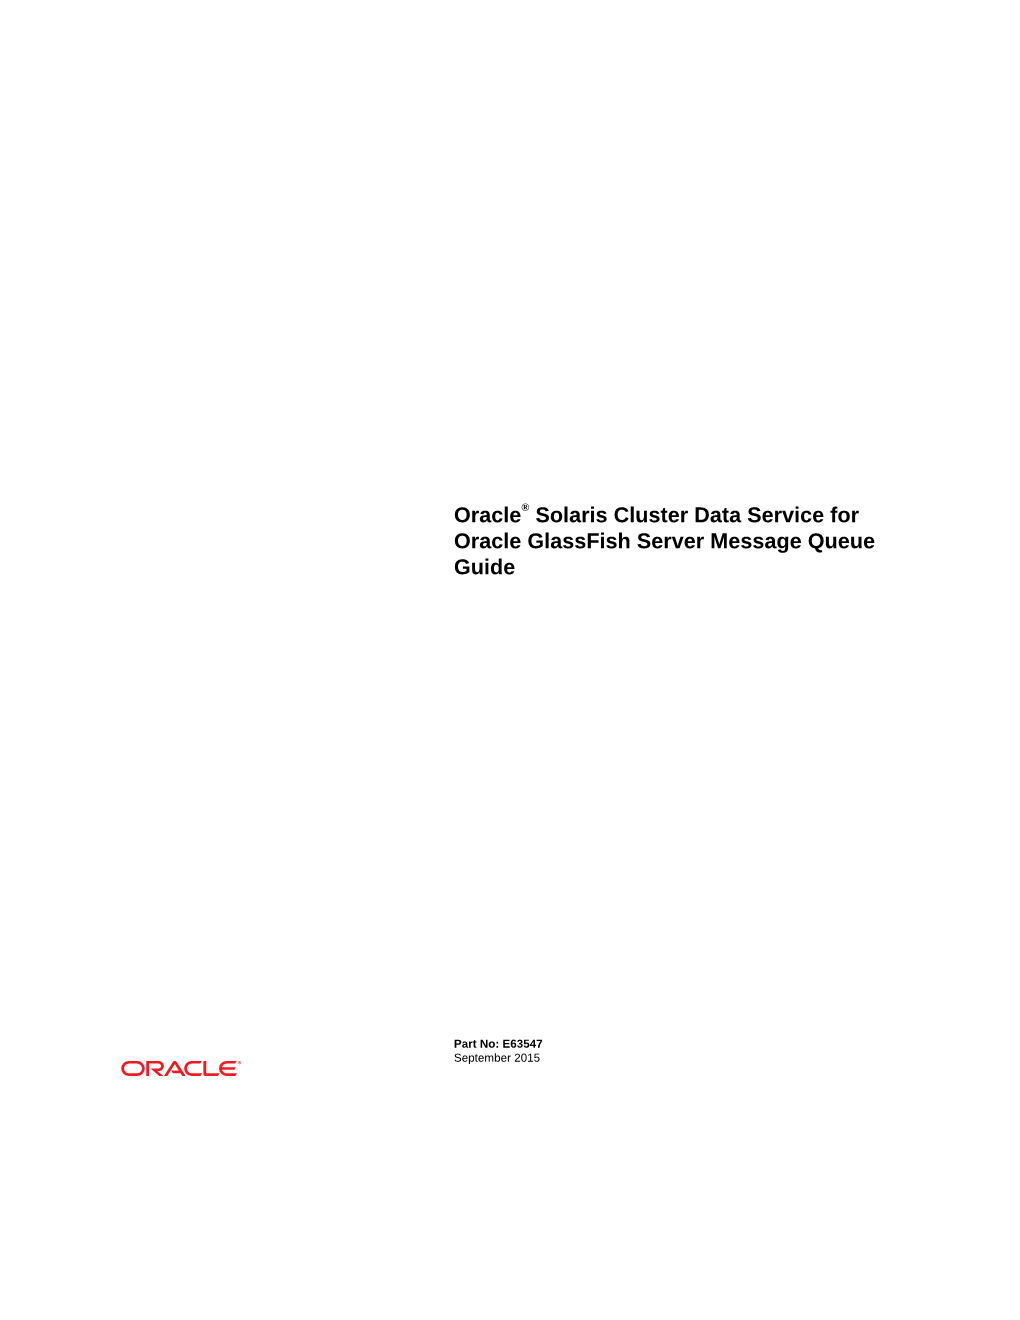 Oracle® Solaris Cluster Data Service for Oracle Glassfish Server Message Queue Guide